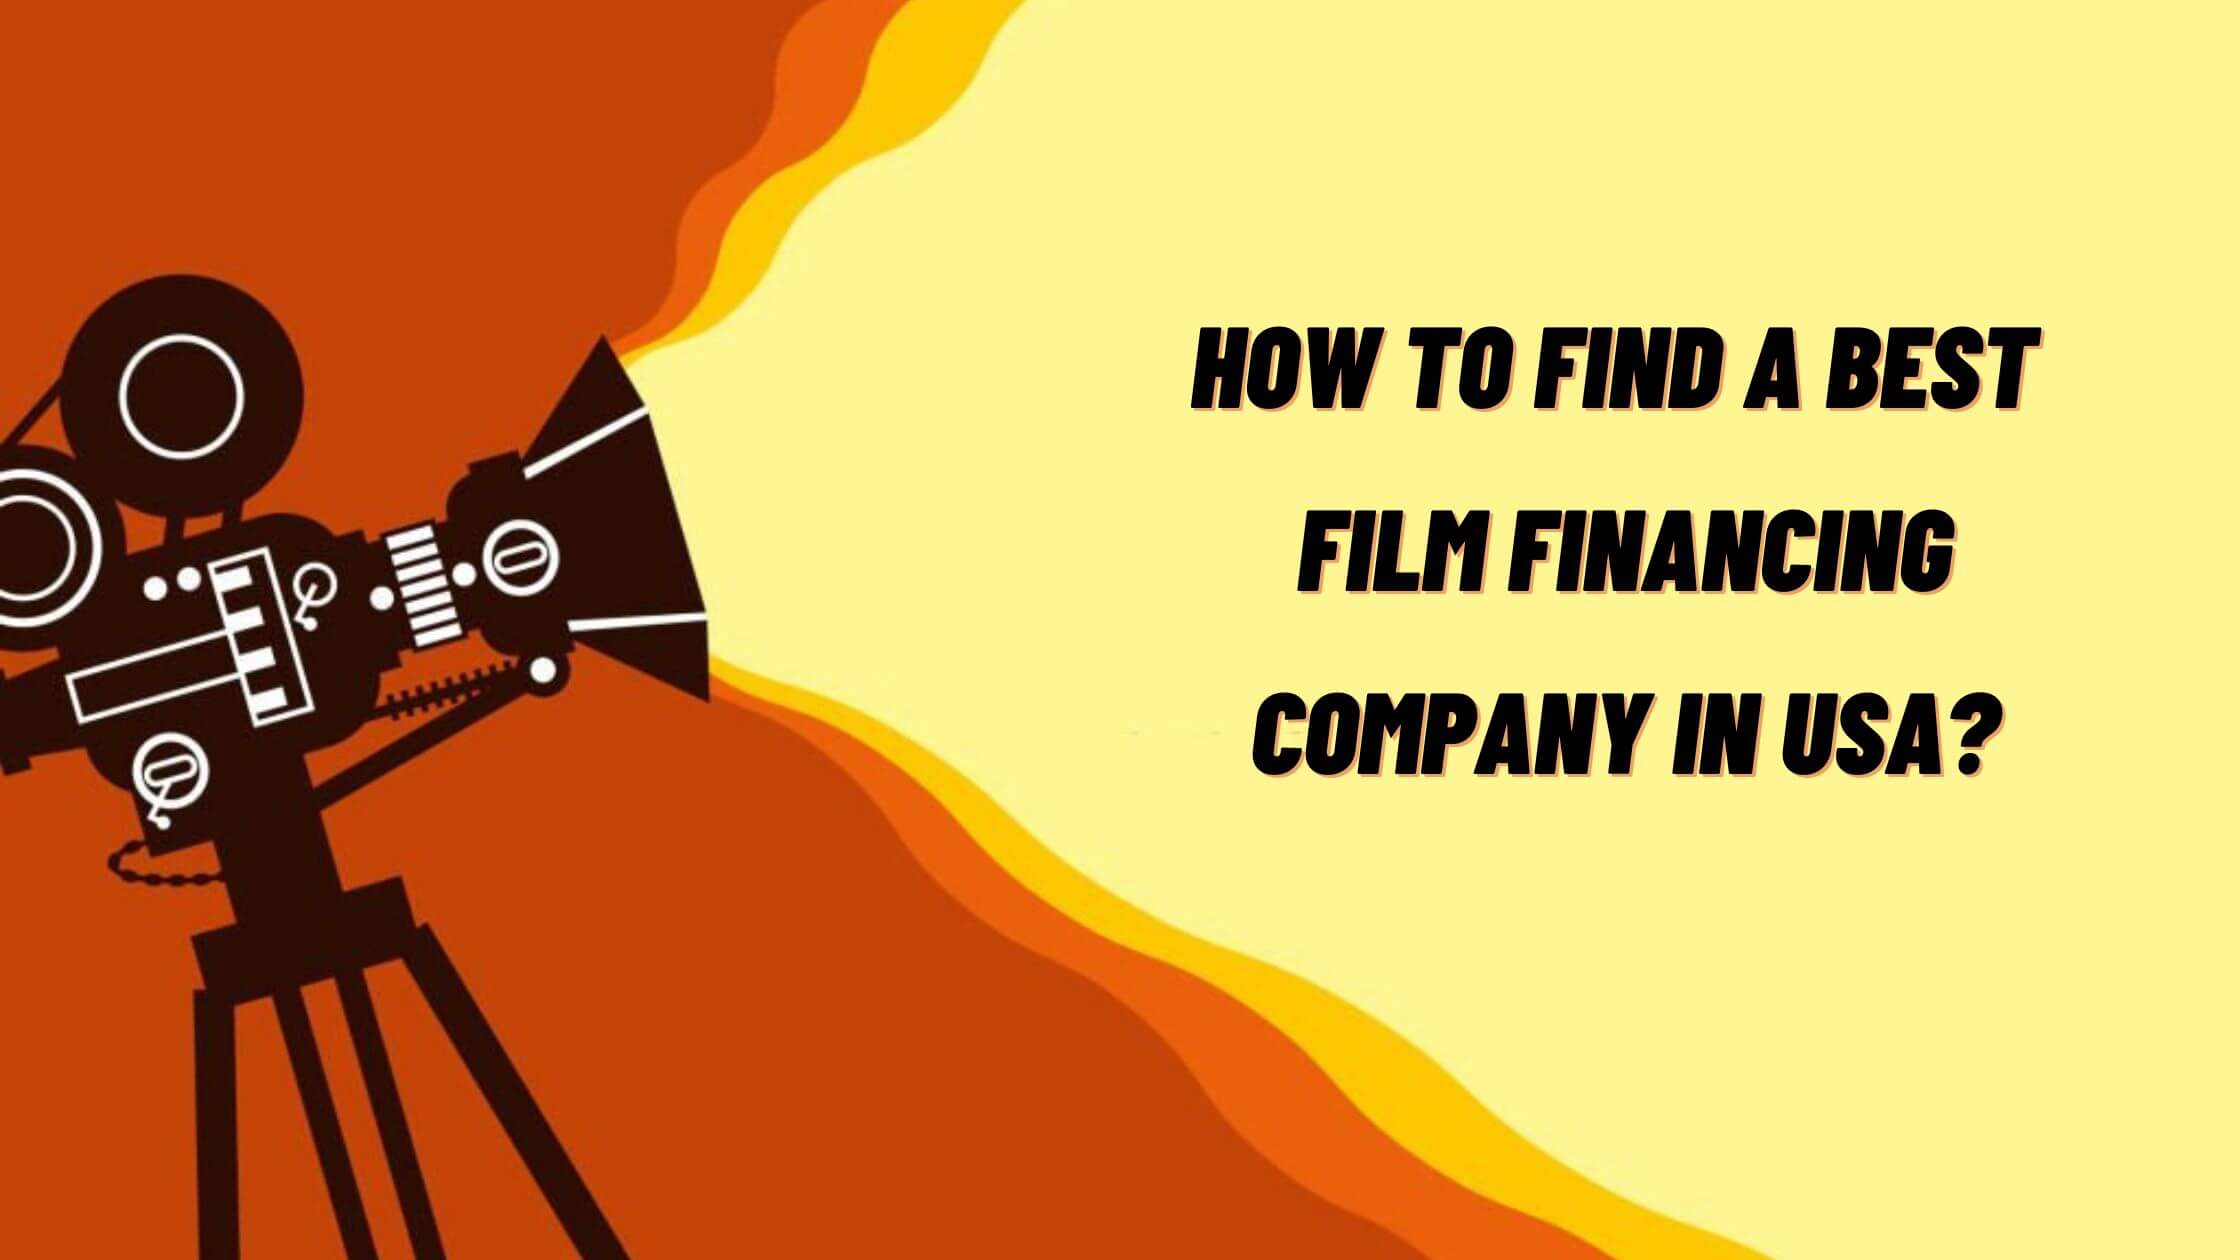 How To Find A Best Film Financing Company In USA